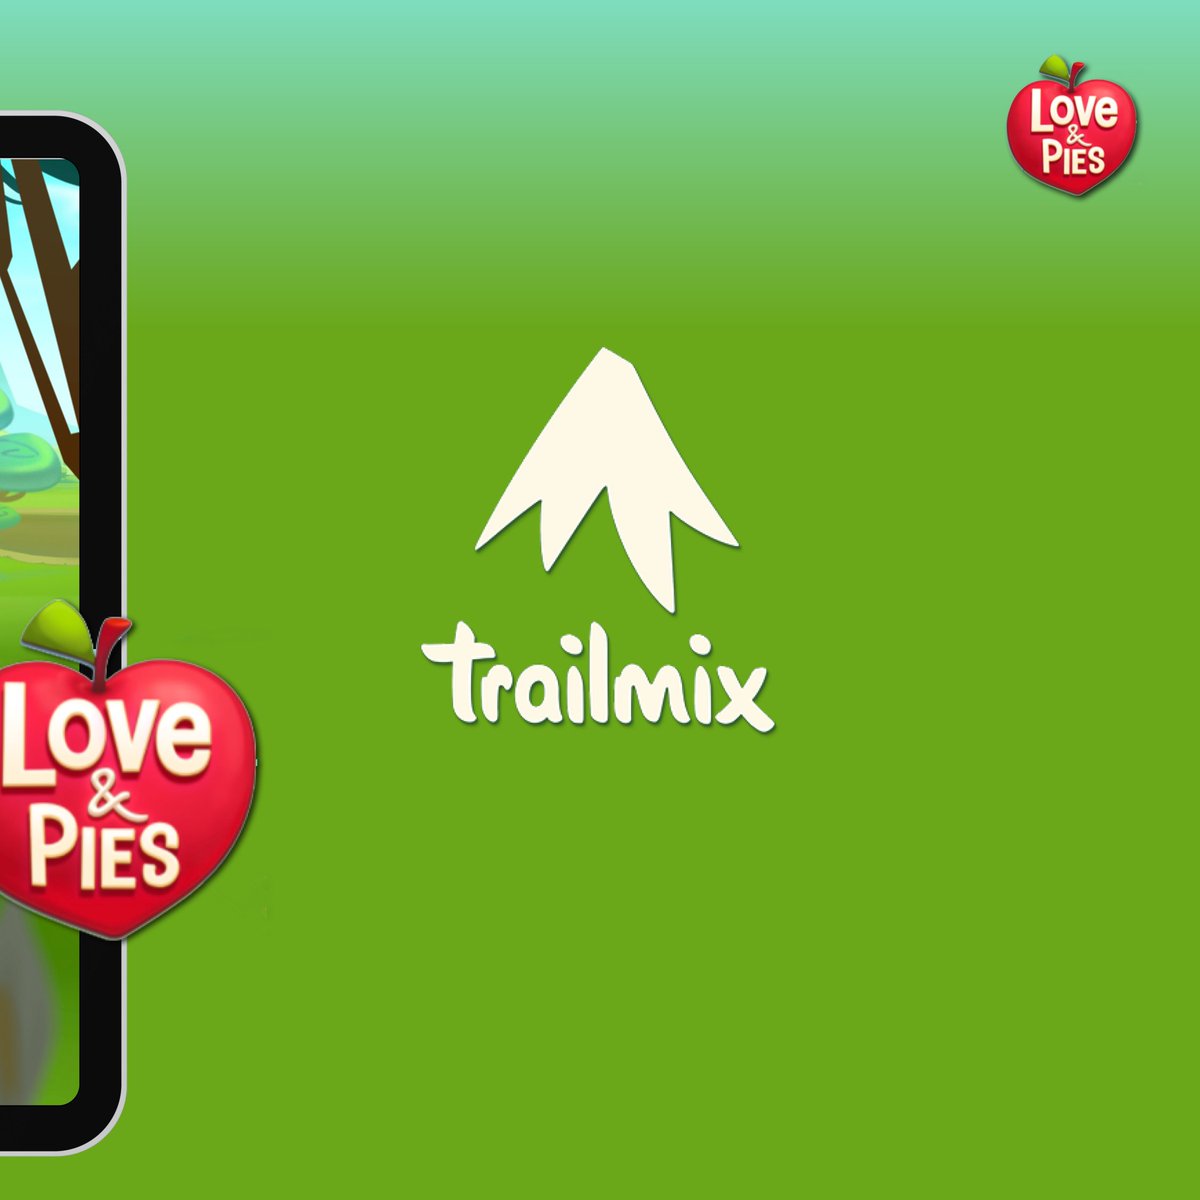 This week we're showing some love to @TrailmixLtd and their recent game launch 'Love & Pies'❤🥧 A great project with a great group of people, Trailmix trusted us to deliver a solid website for their impending game launch. #webdev #gaming